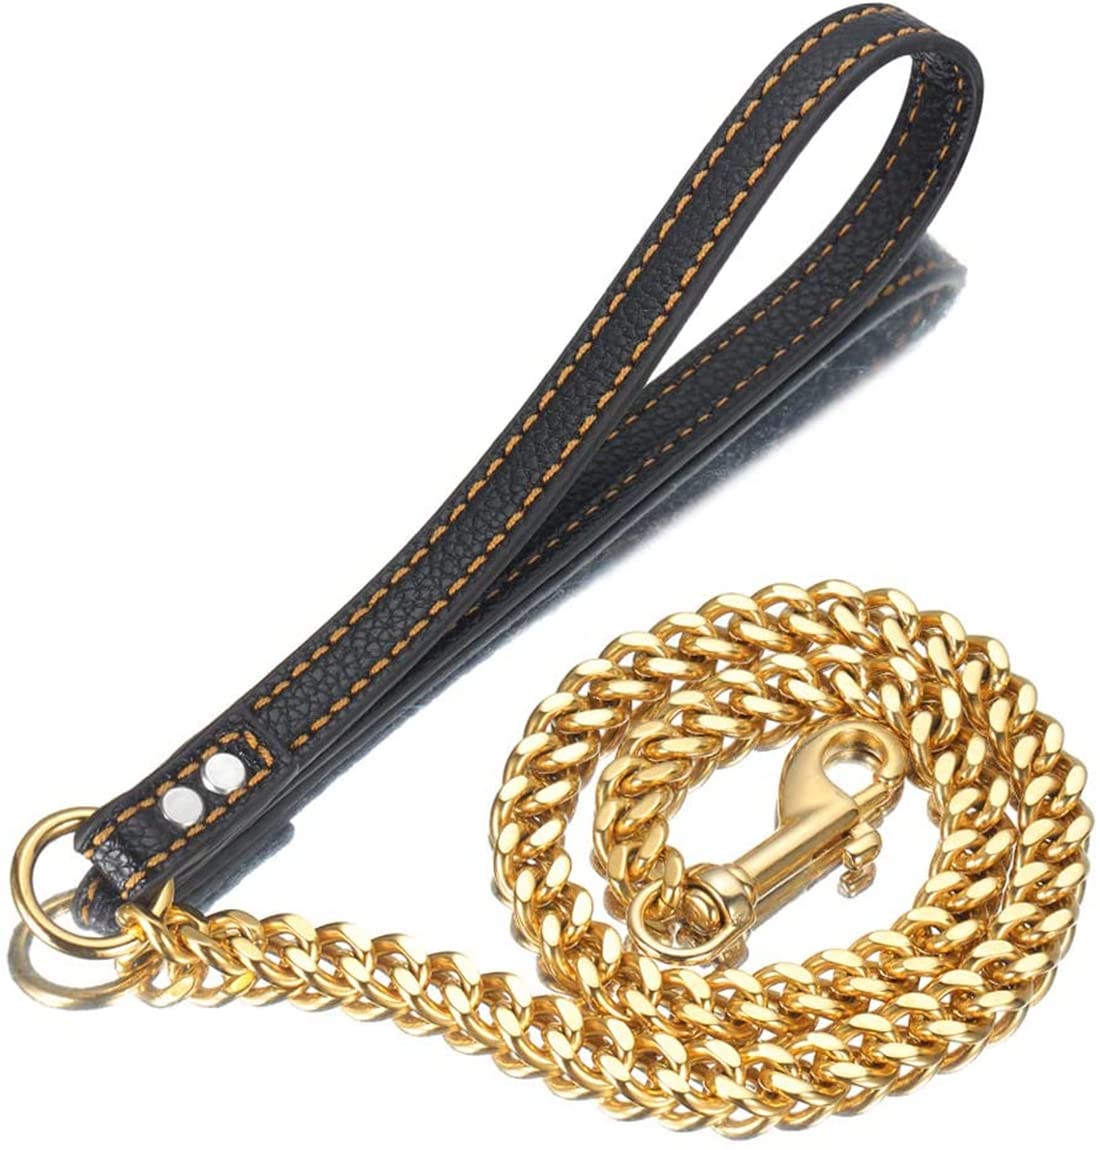 Aiyidi Strong goldSilver Dog chain Leash 3FT 4FT 5FT Stainless Steel 12mm curb cuban Link Dog Leash Training Walking with comfor